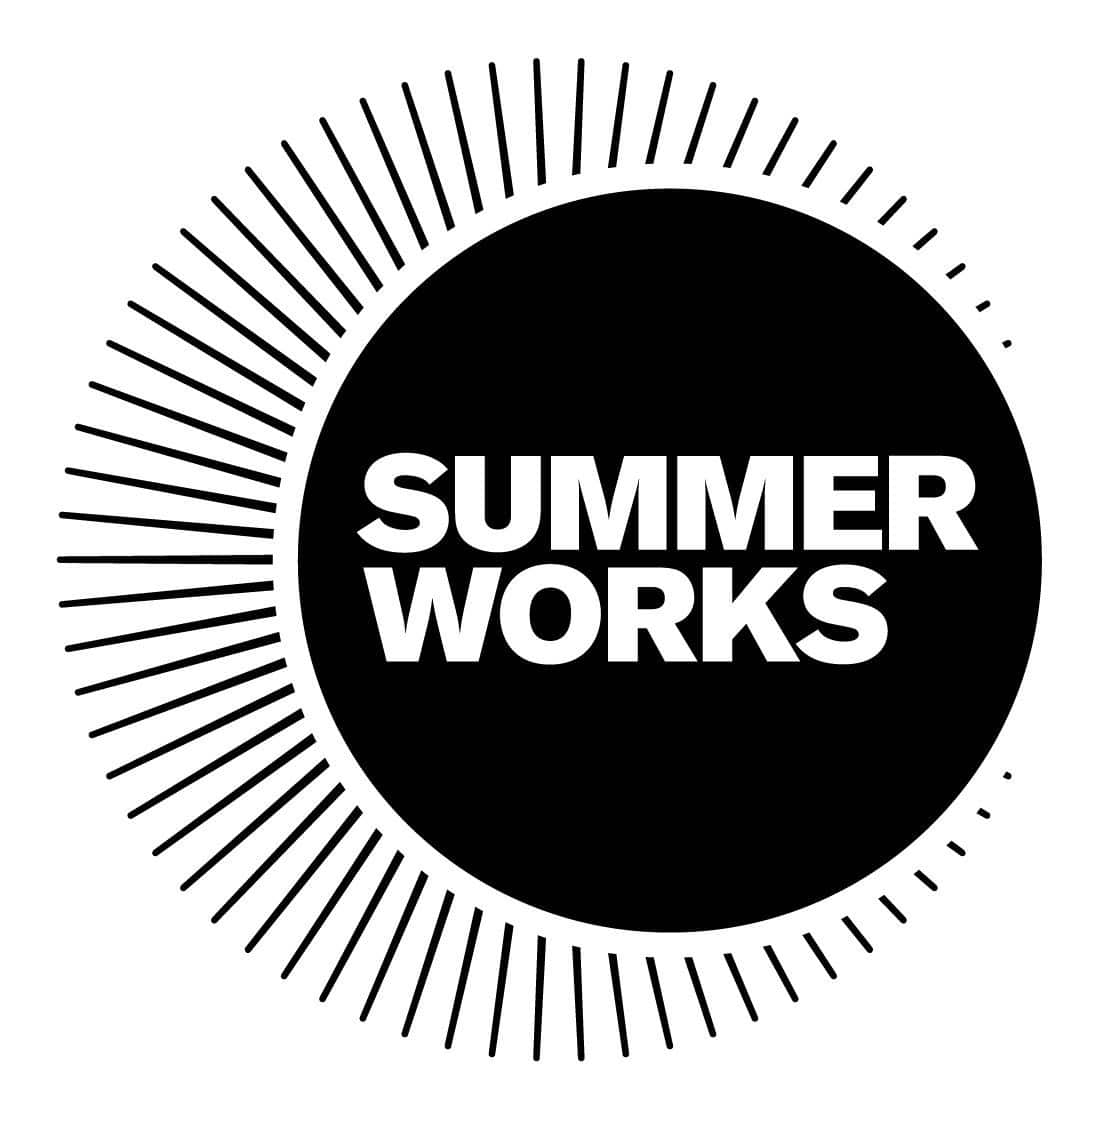 Featured Image for Summerworks '18: Philip's Top 5 courtesy of   | CJRU